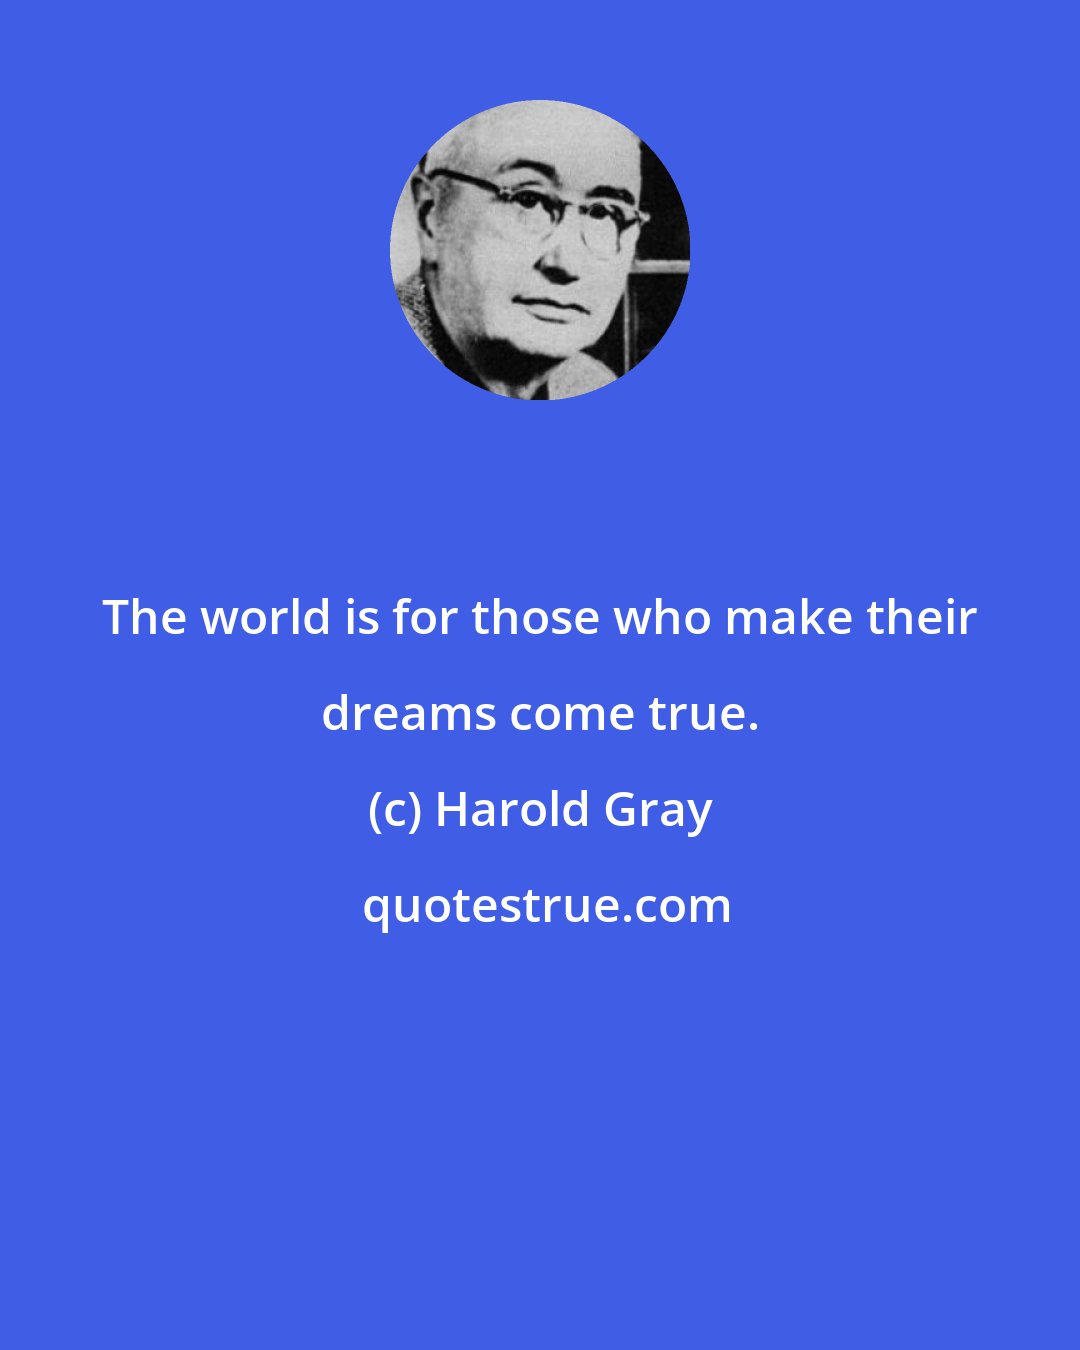 Harold Gray: The world is for those who make their dreams come true.